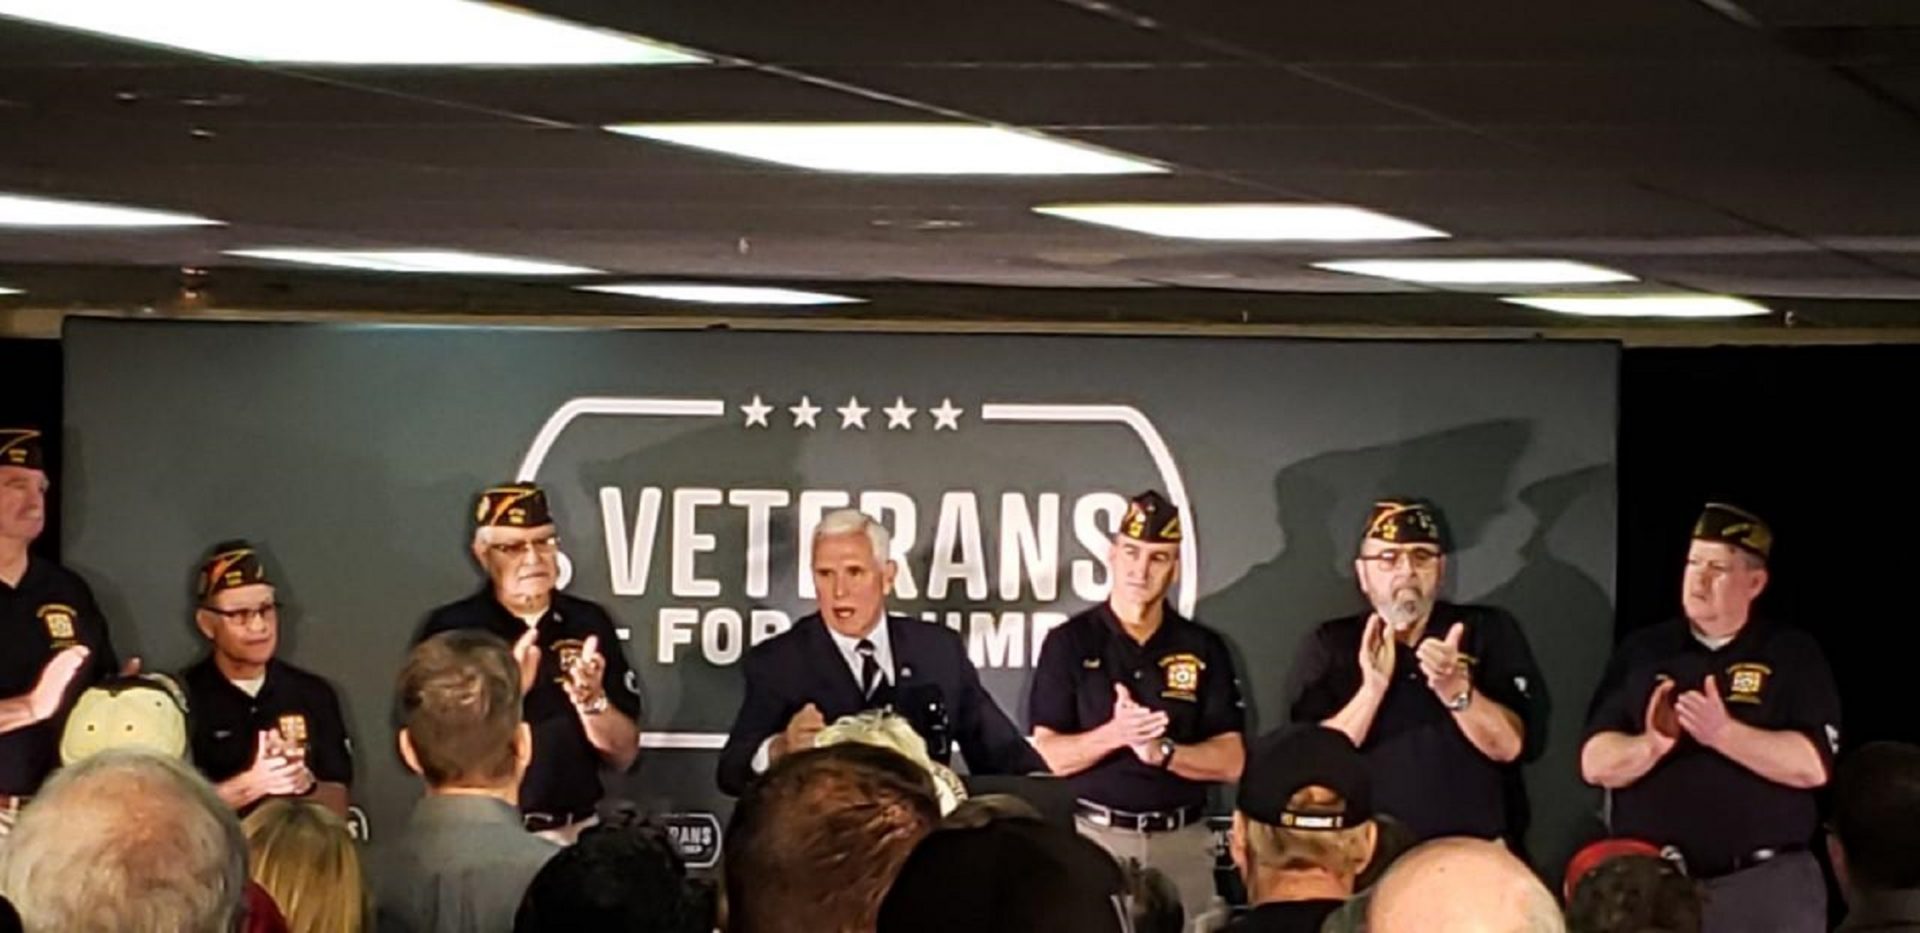 Vice President Mike Pence speaking to supporters at a Beaver County, Pa. VFW hall on Tuesday, Dec. 10, 2019.